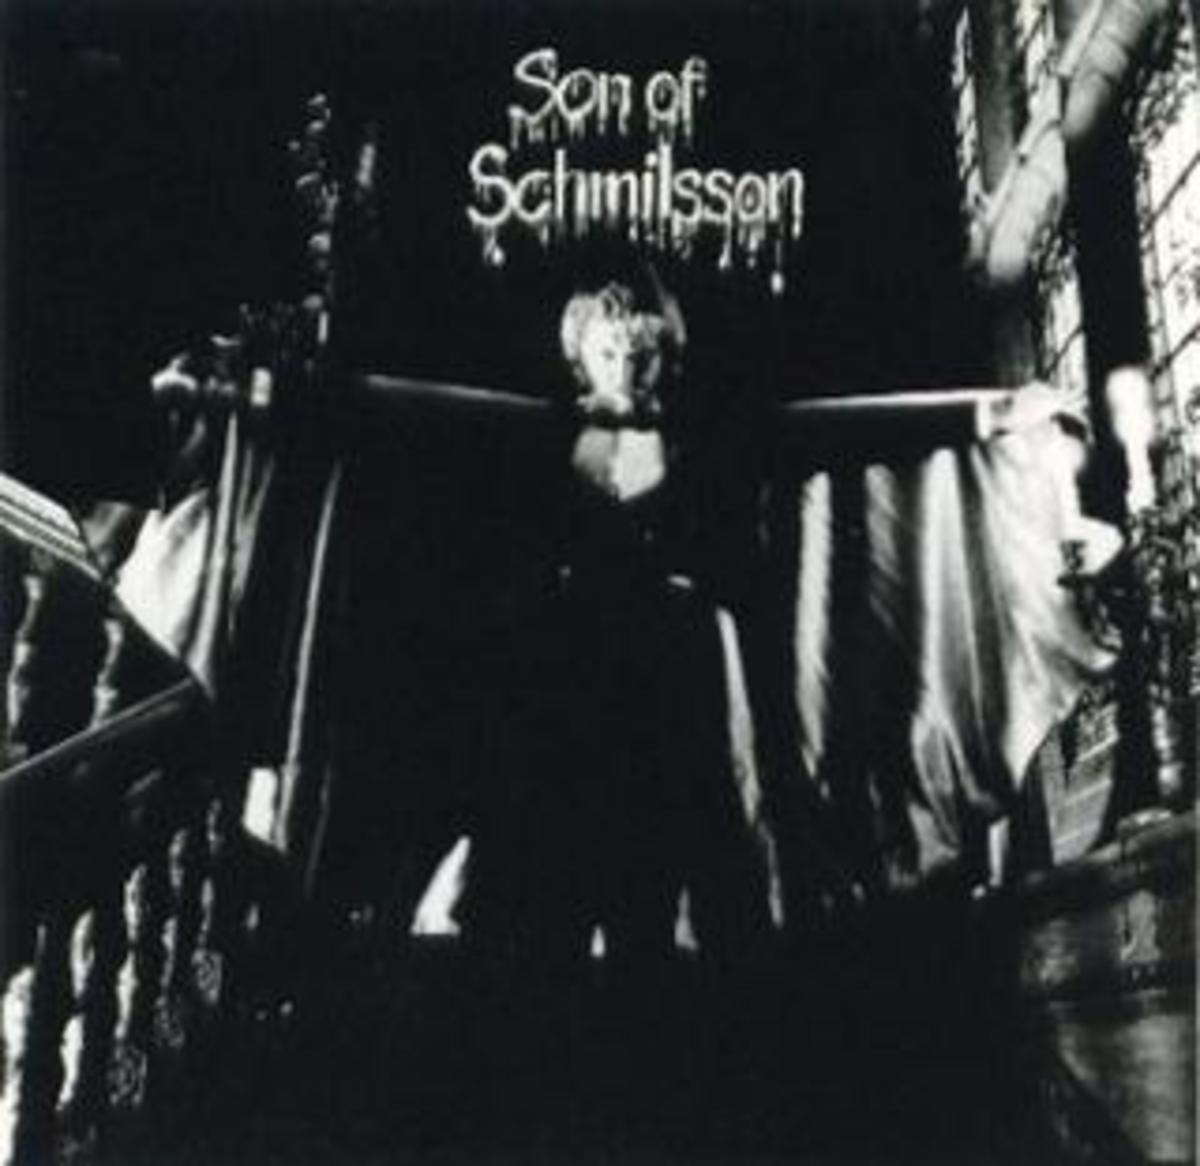 Follow up to Nilsson Schmilsson Was Mistakenly Panned by Critics and Fans